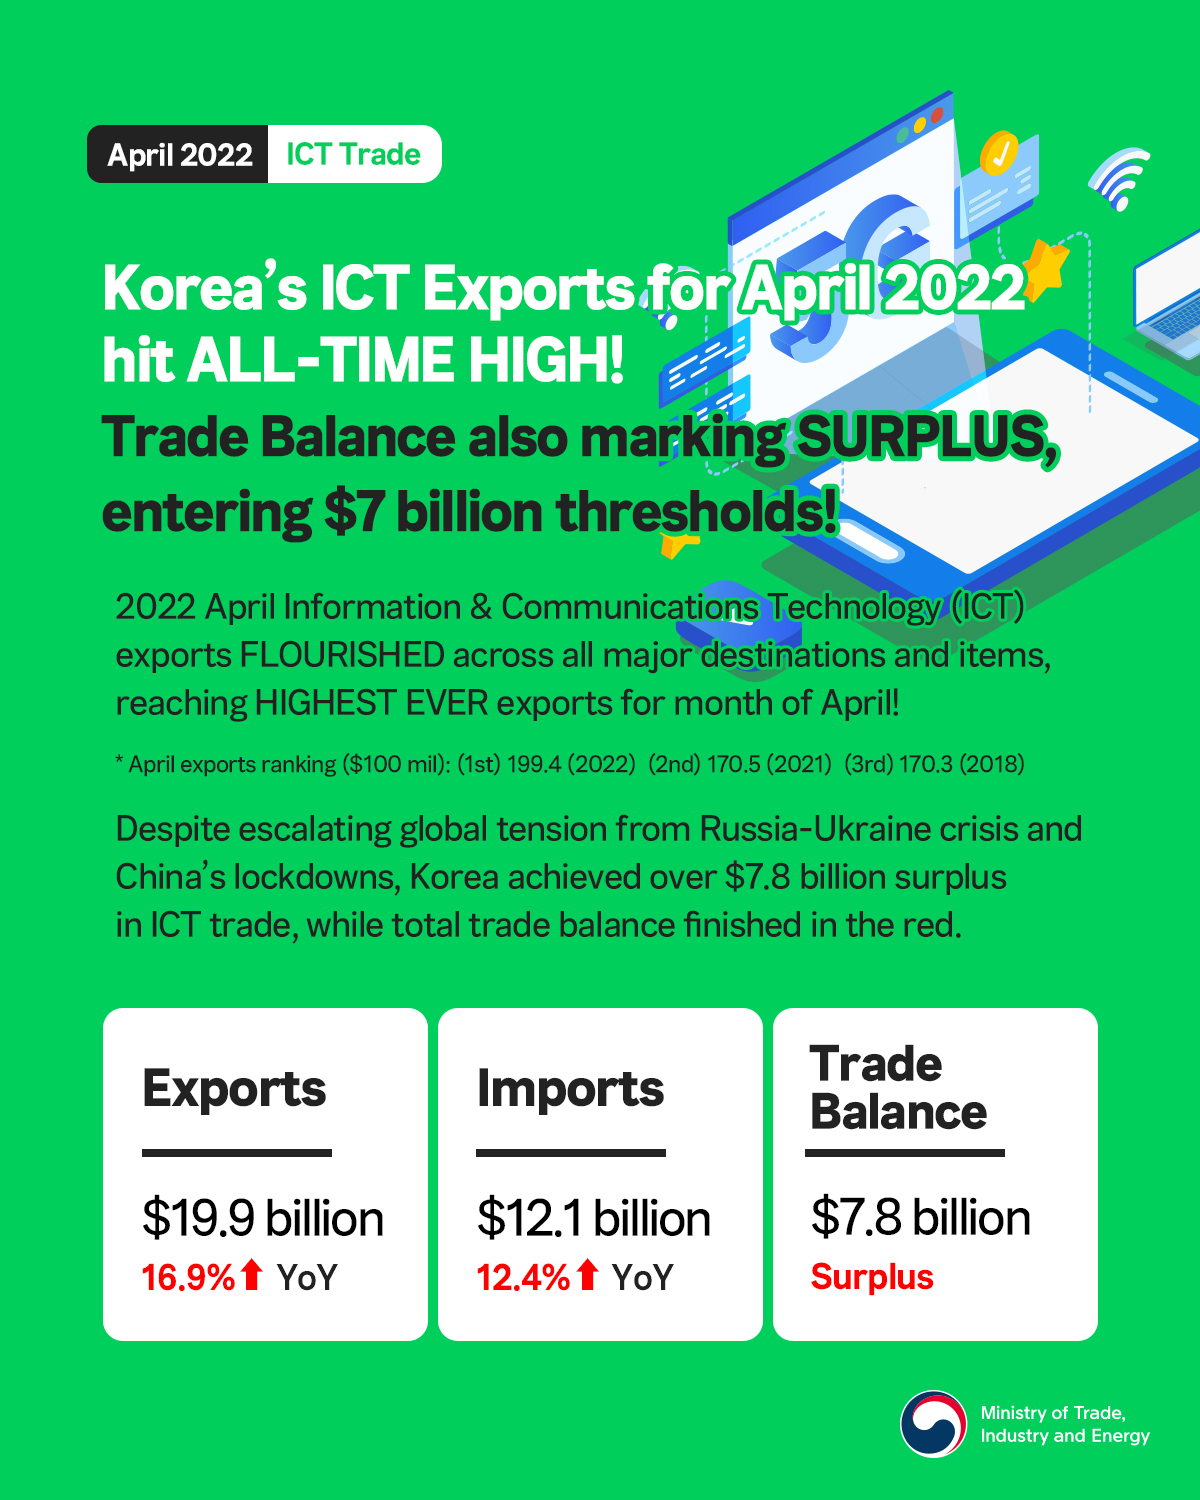 Korea’s ICT exports hit all-time high of $19.9 billion in April!